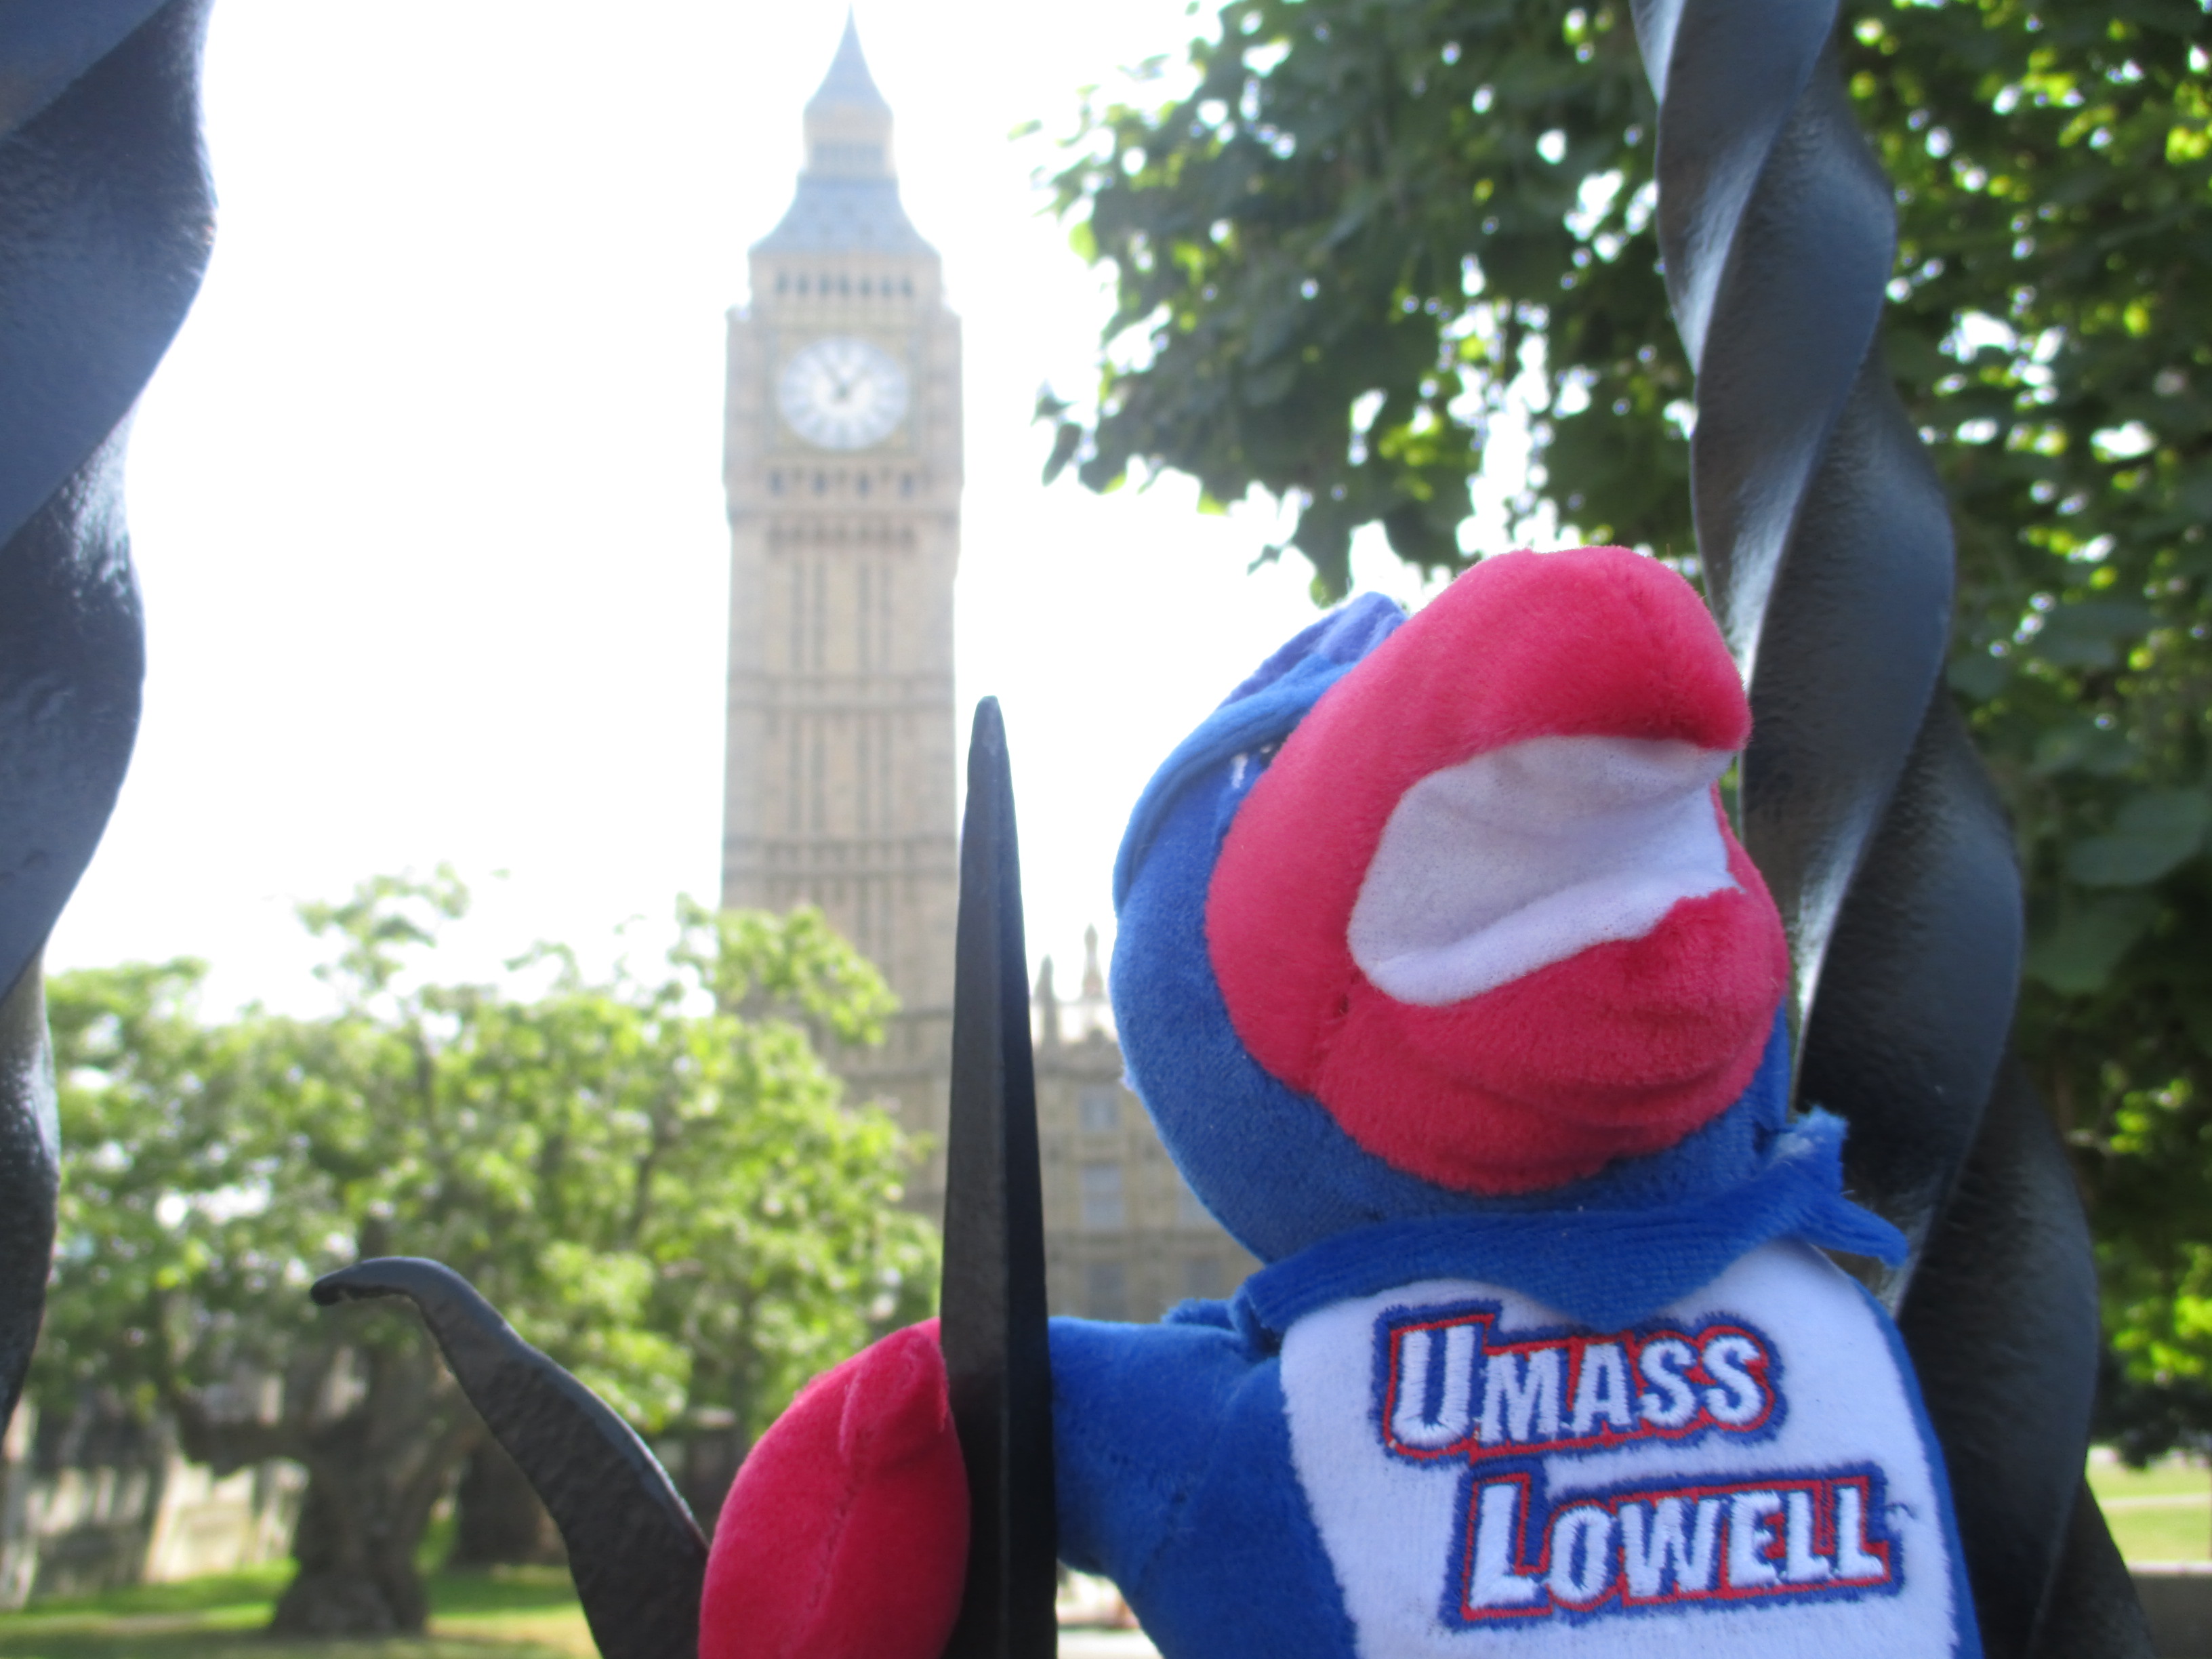 Stuffed animal of Rowdy the River Hawk - UMass Lowell’s mascot poses in front of Big Ben attraction